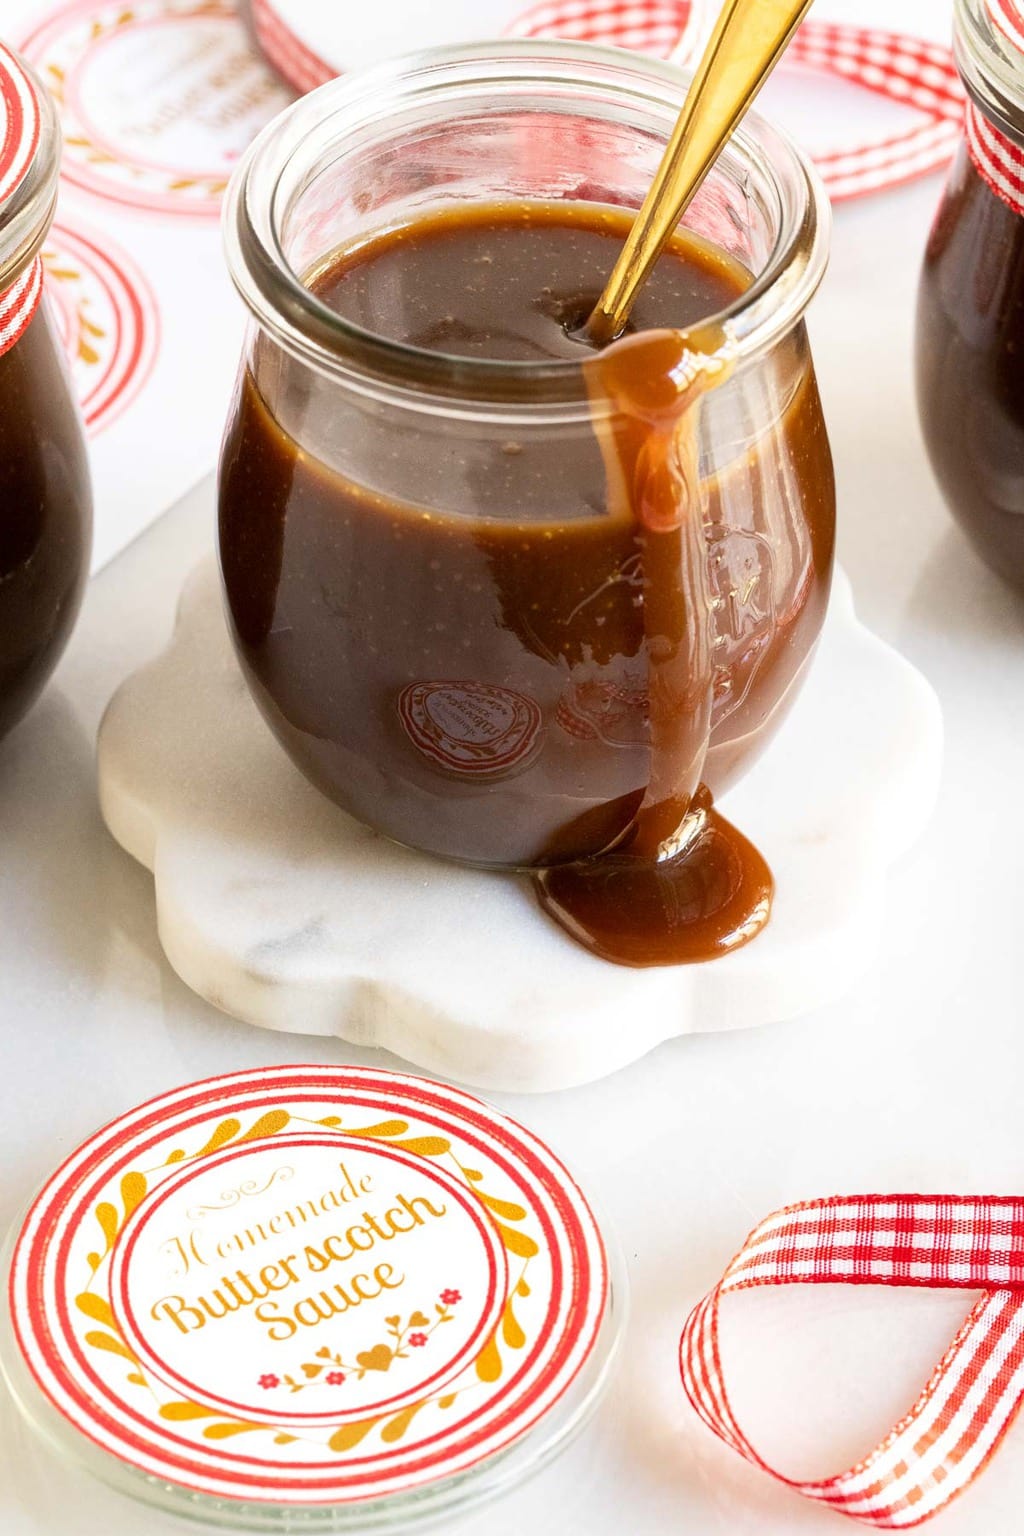 Vertical photo of a glass jar of Ridiculously Easy Butterscotch Sauce with custom gift labels in the foreground and background.